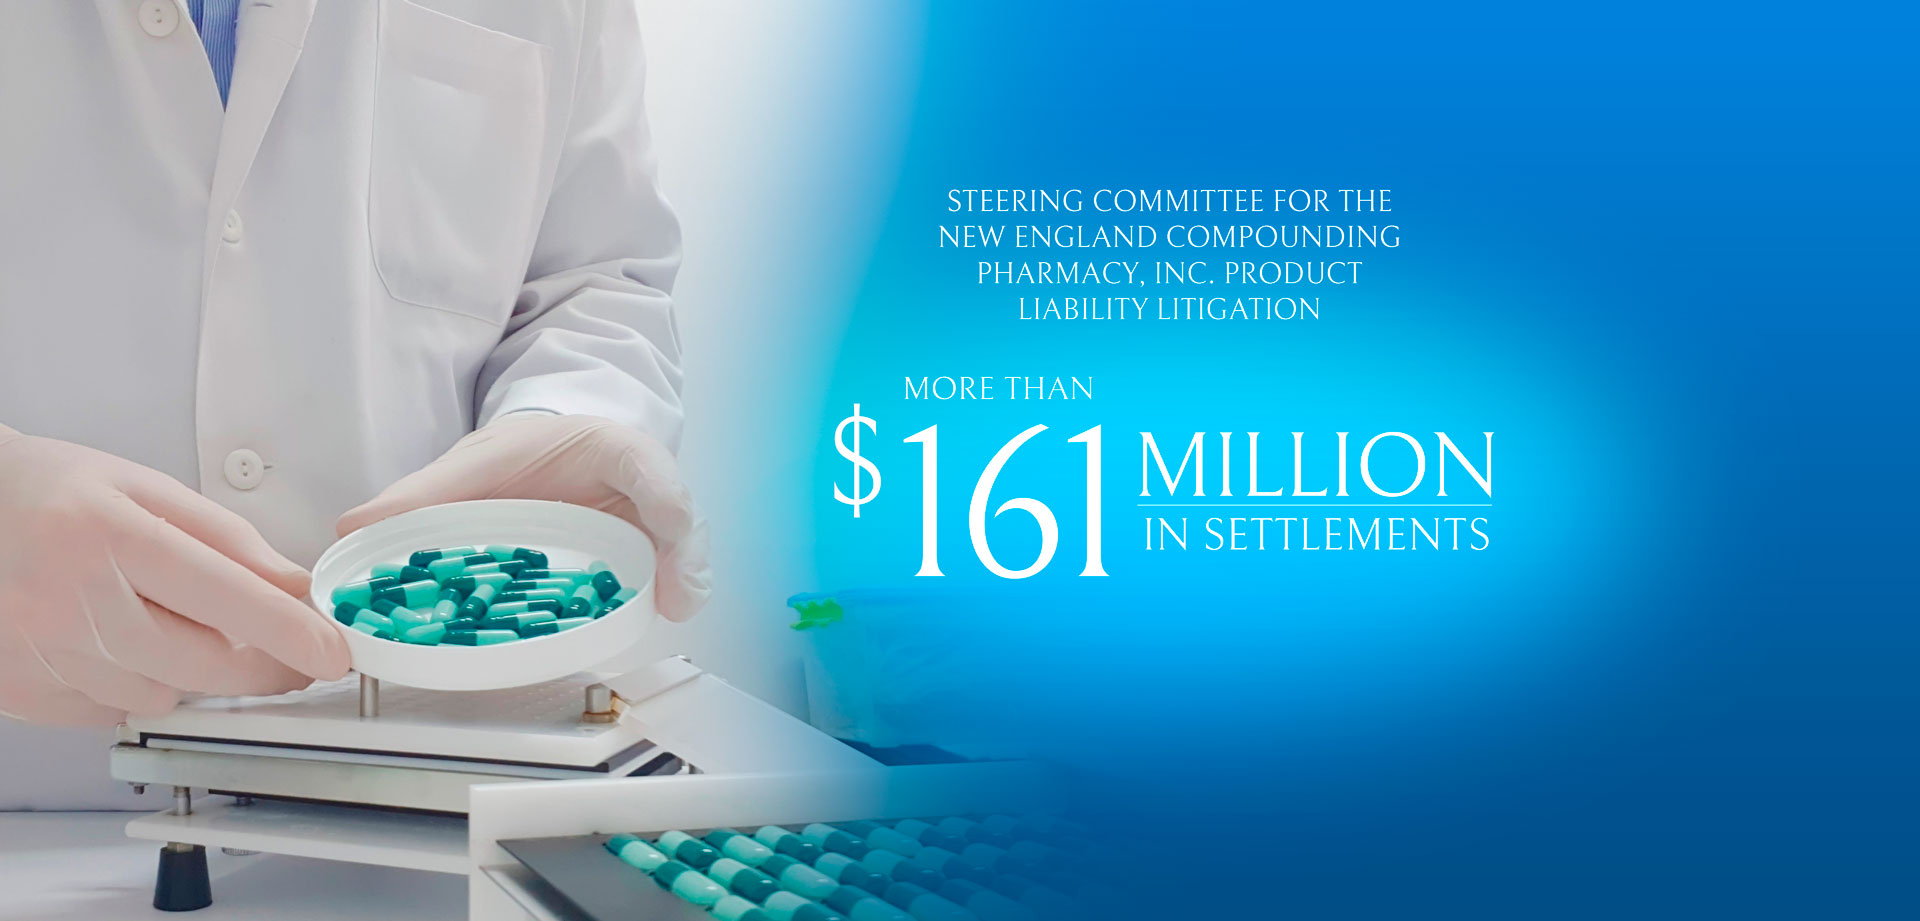 Steering Committee for the New England Compounding Pharmacy, Inc. Product Liability Litigation - Result: More than $161 million in settlements